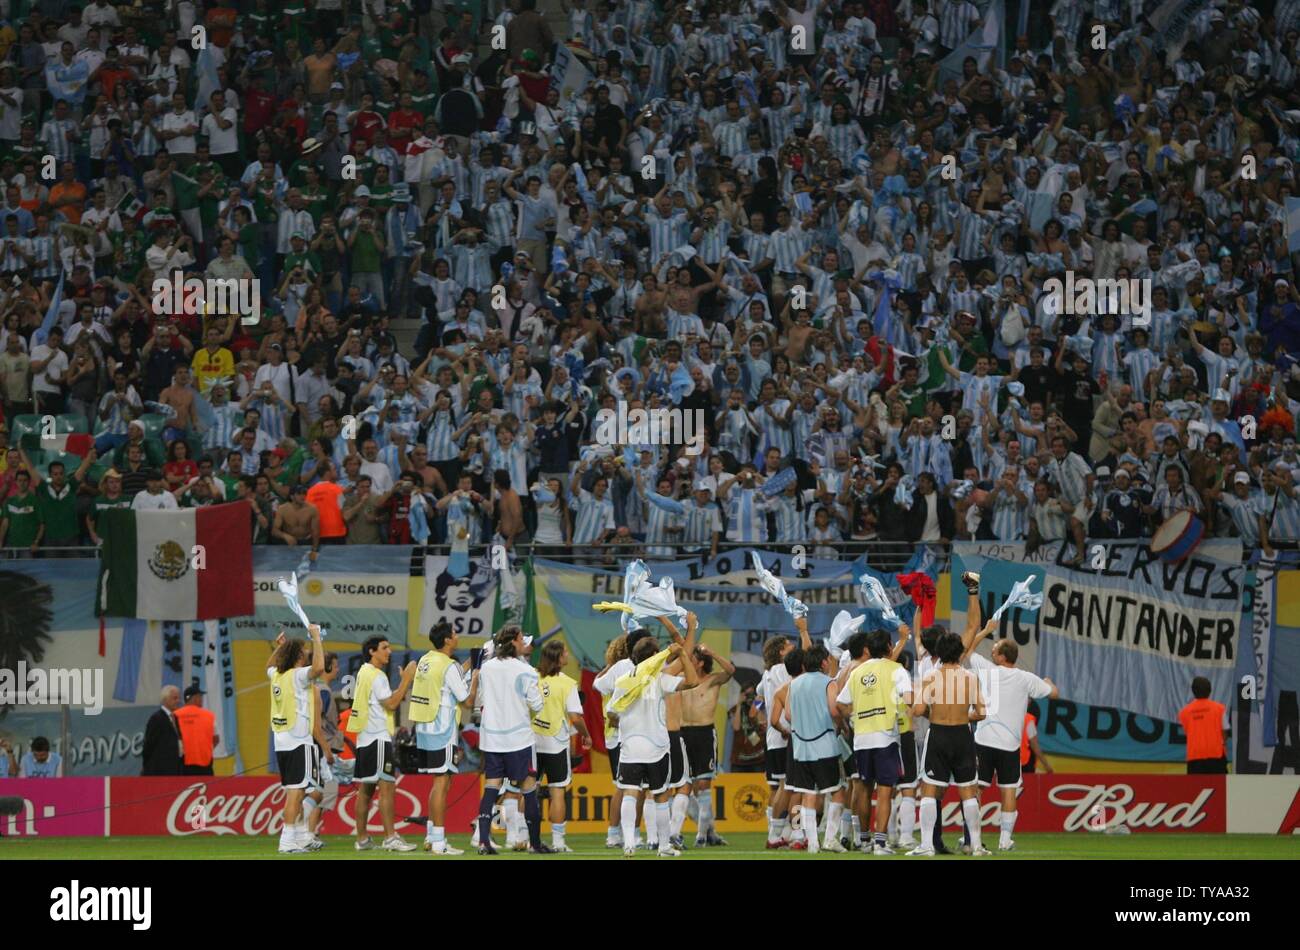 Argentina's players wave to the crowd in the last 16 knock-out stage of the FIFA World Cup Germany 2006 at the Zentralstadion in Leipzig, Germany, on June 24, 2006. Argentina needed extra-time and a wonder strike from Maxi Rodriguez to give them a 2-1 victory over Mexico and a place in the quarter-finals.  (UPI Photo/Christian Brunskill) Stock Photo